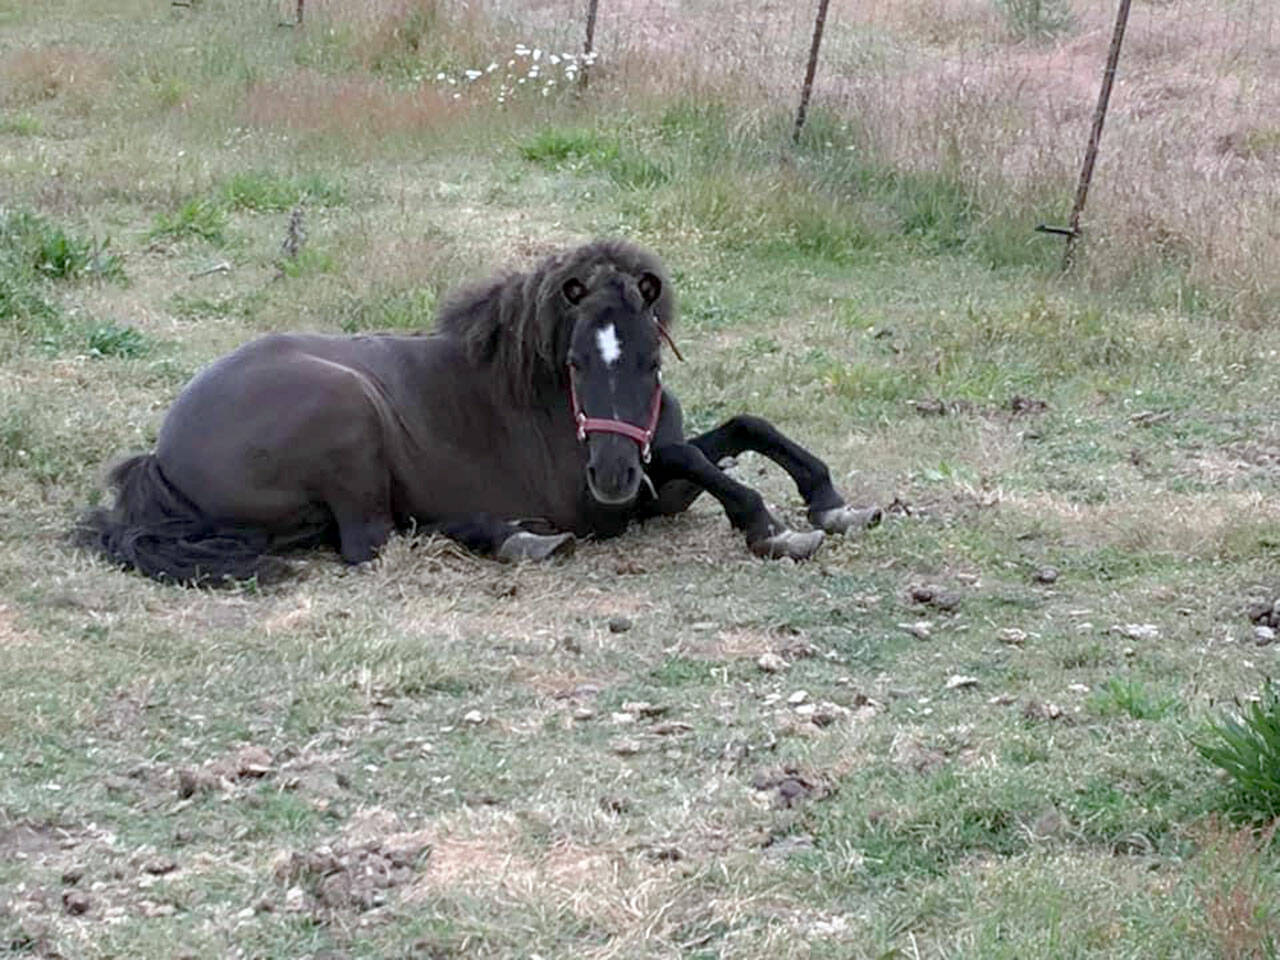 OPEN’s Spring Tack Sale is Saturday, 9 a.m. to 3 p.m., 251 Roupe Road (off Hooker Road). Proceeds benefit rescued horses, minis, ponies (such as the one pictured with grossly overgrown hooves) and donkeys. Western and English saddles, saddle pads, halters, sheets, bits, bridles; western jewelry, clothes, boots and more. (photo by Valerie Jackson)